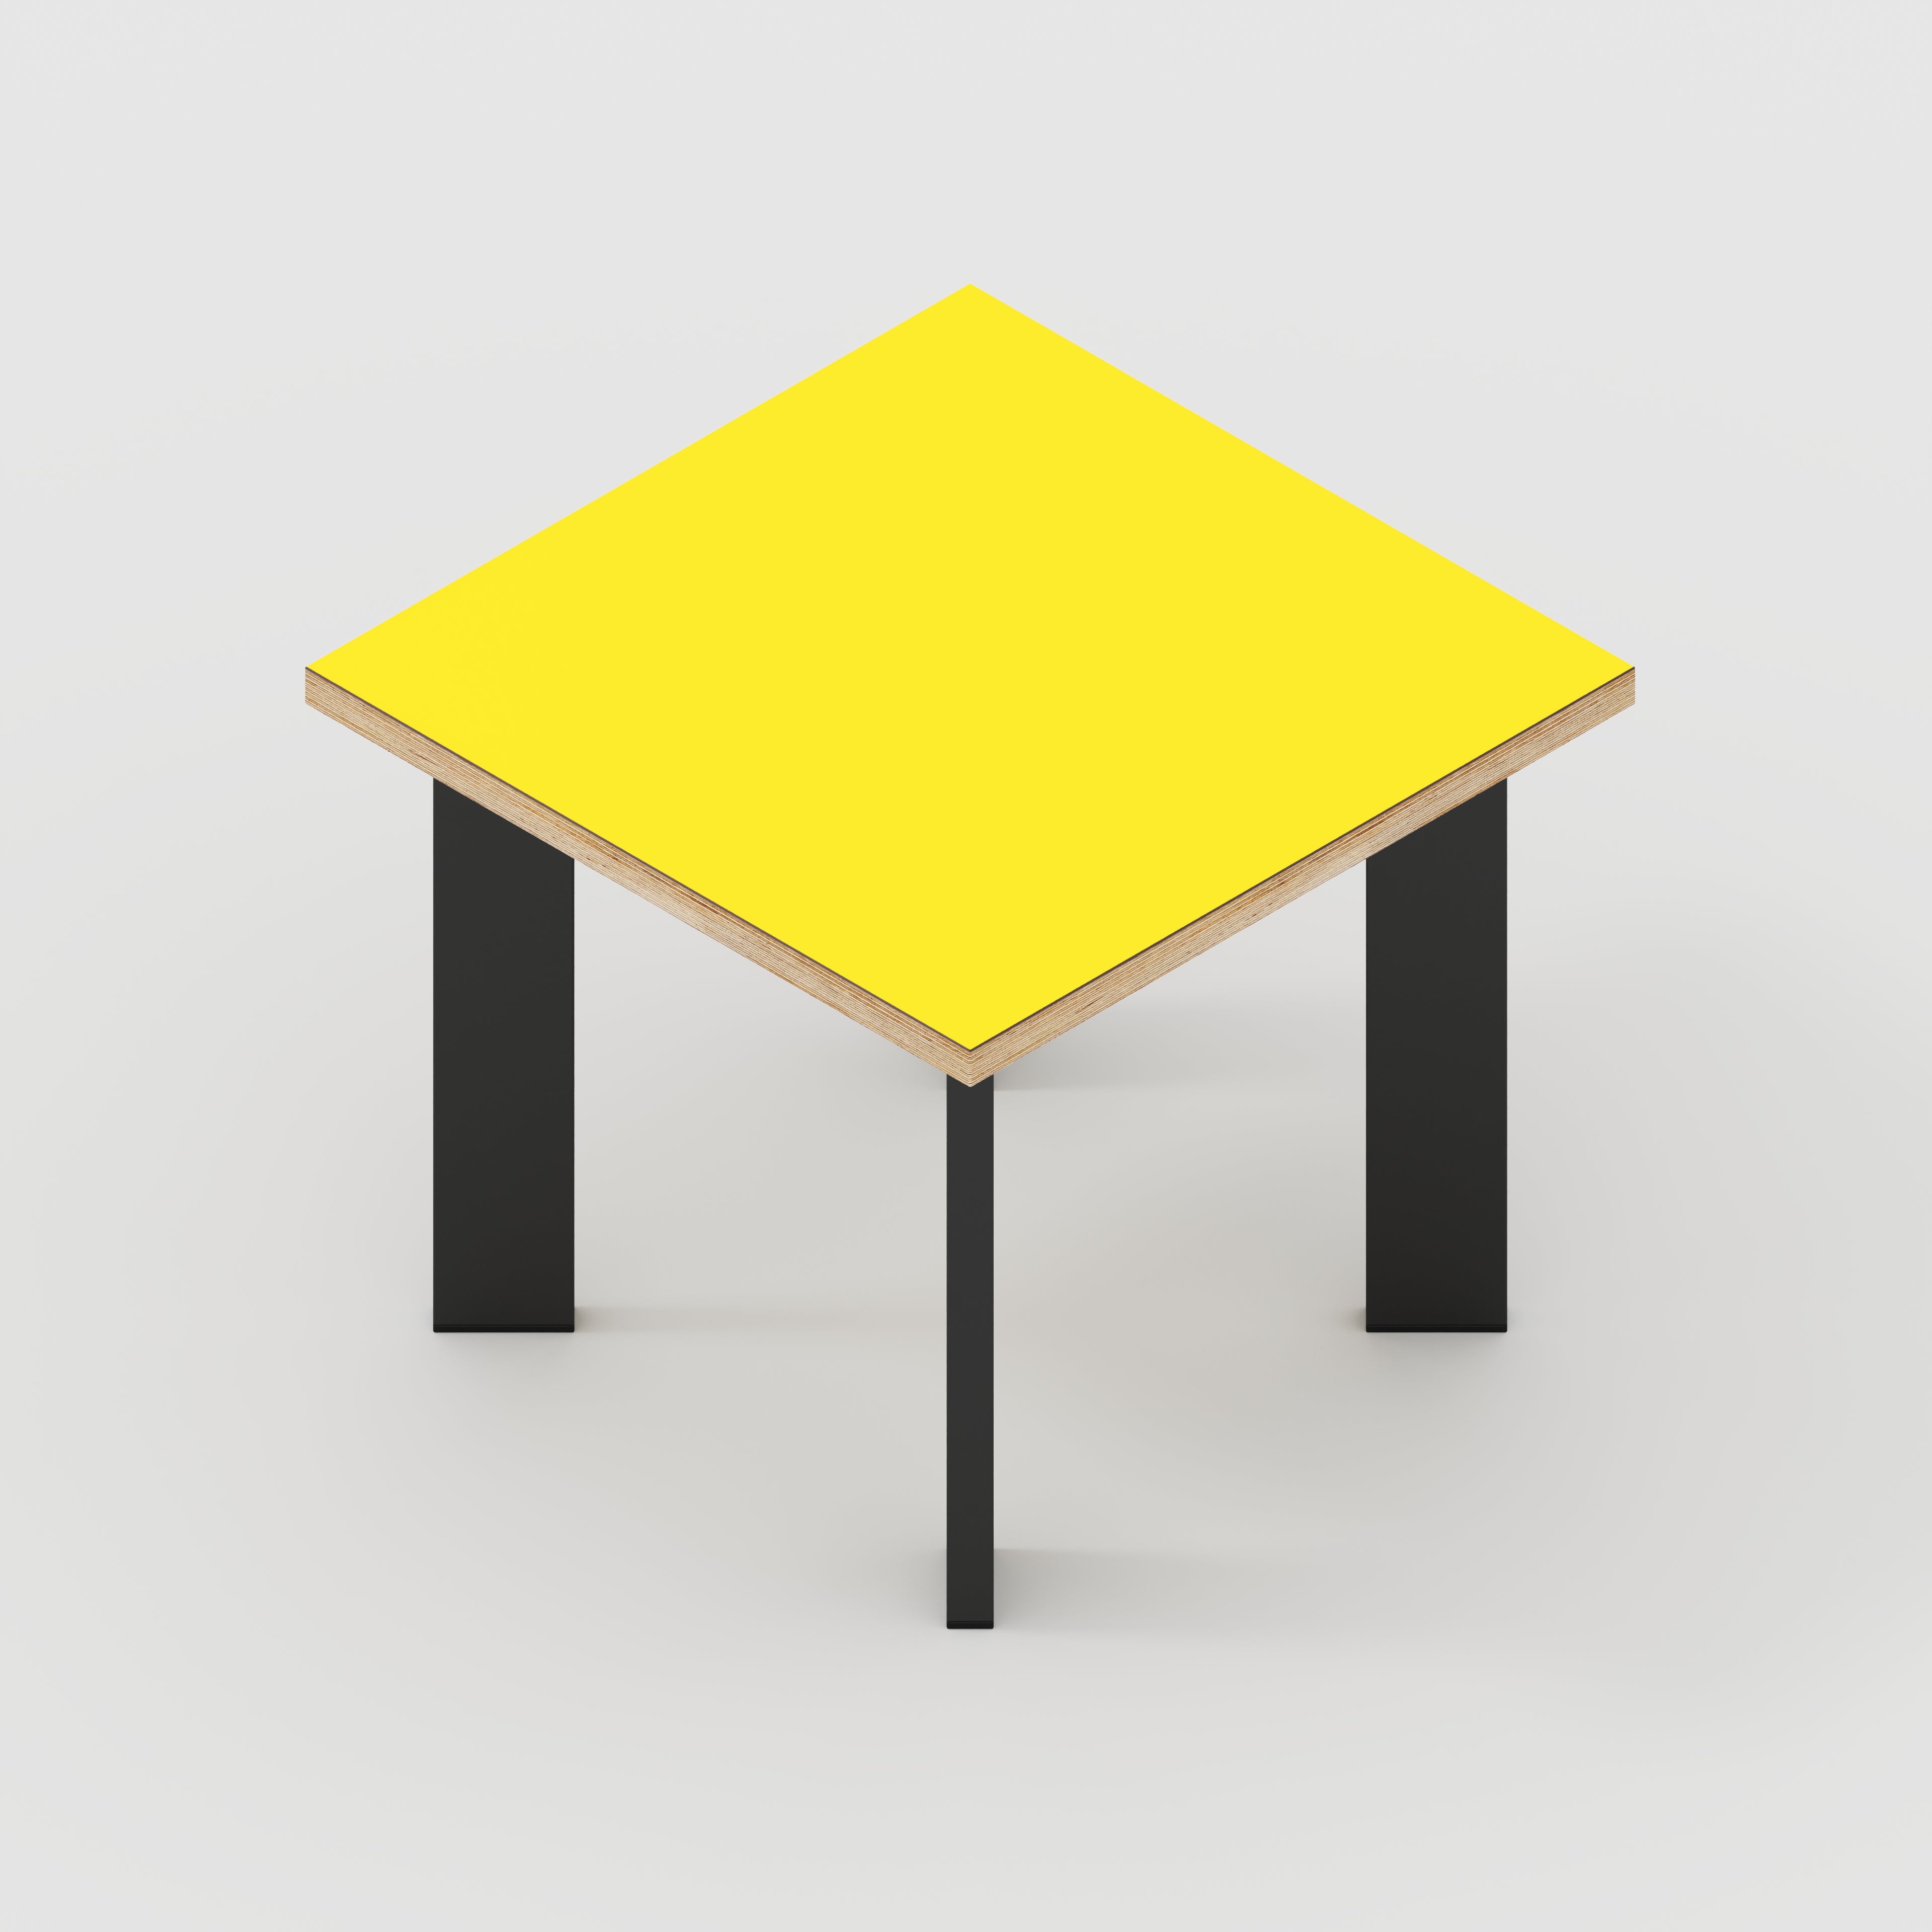 Side Table with Rectangular Single Pin Legs - Formica Chrome Yellow - 500(w) x 500(d) x 425(h)